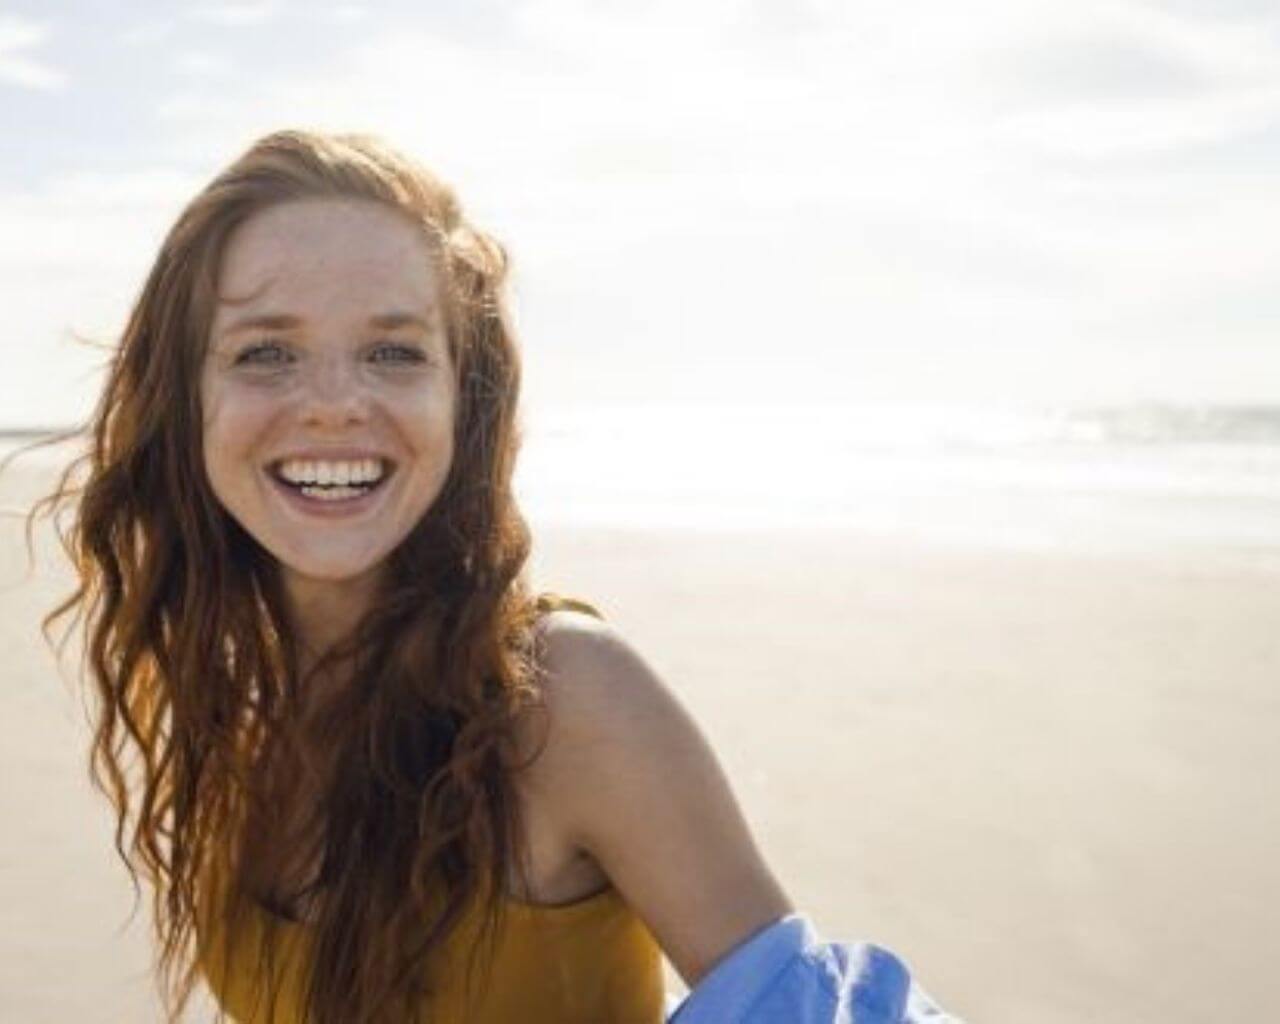 pic of a smiling girl on a beach